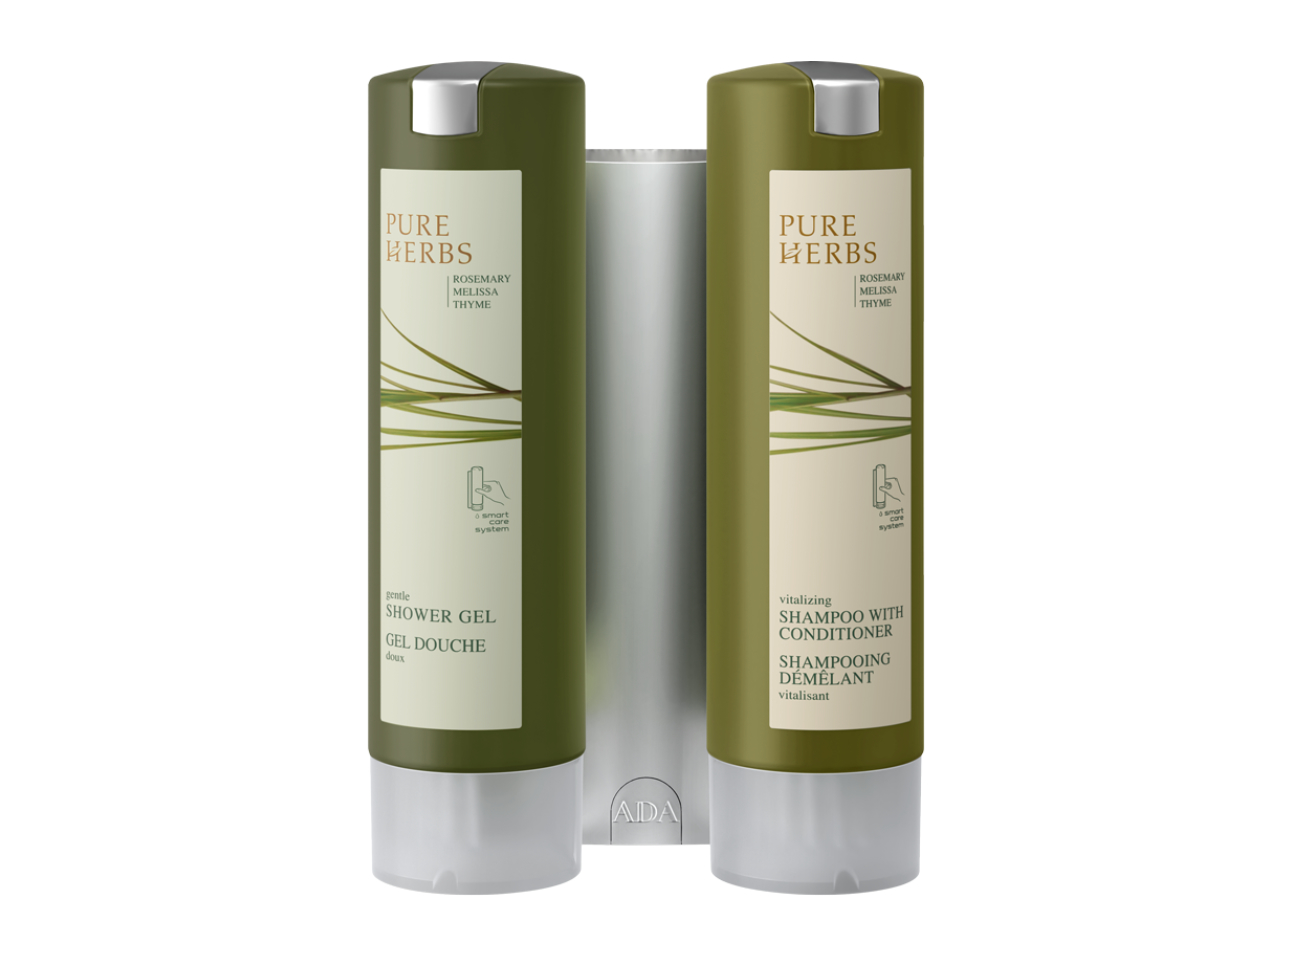 PURE HERBS - Shampoo with Conditioner, 300 ml, Smart Care